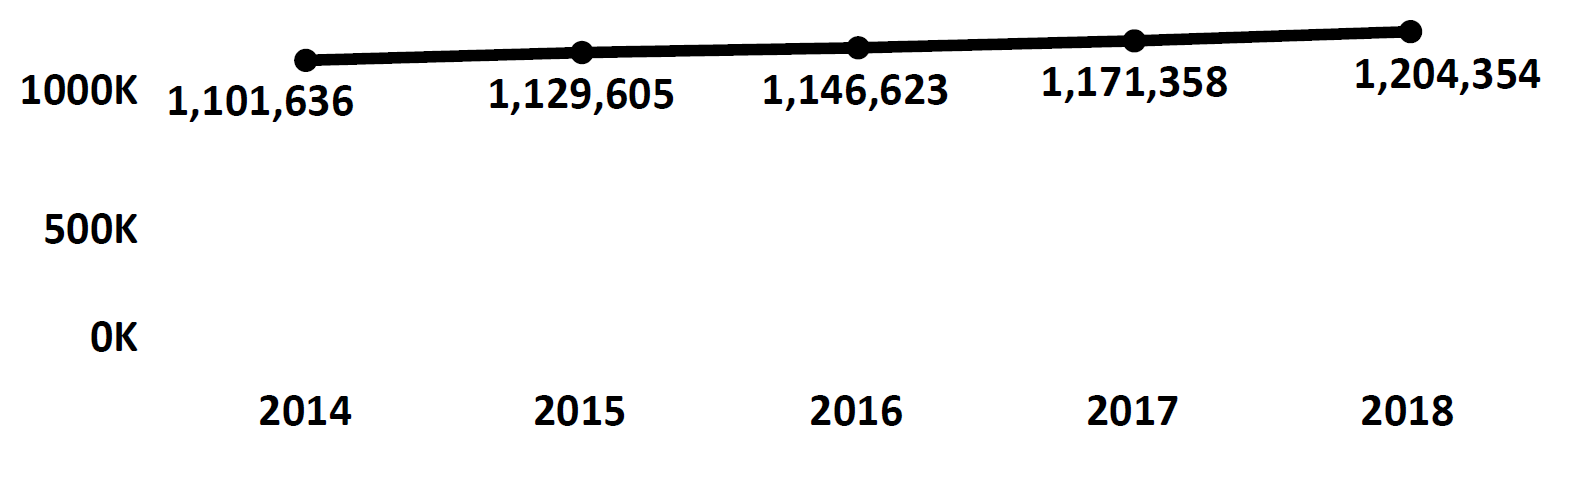 Graph of active Do Not Call registrations in Idaho each fiscal year from 2014 to 2018. In 2014 there were 1.1 million numbers registered, which increased each year. In 2018 there were 1.2 million numbers registered.